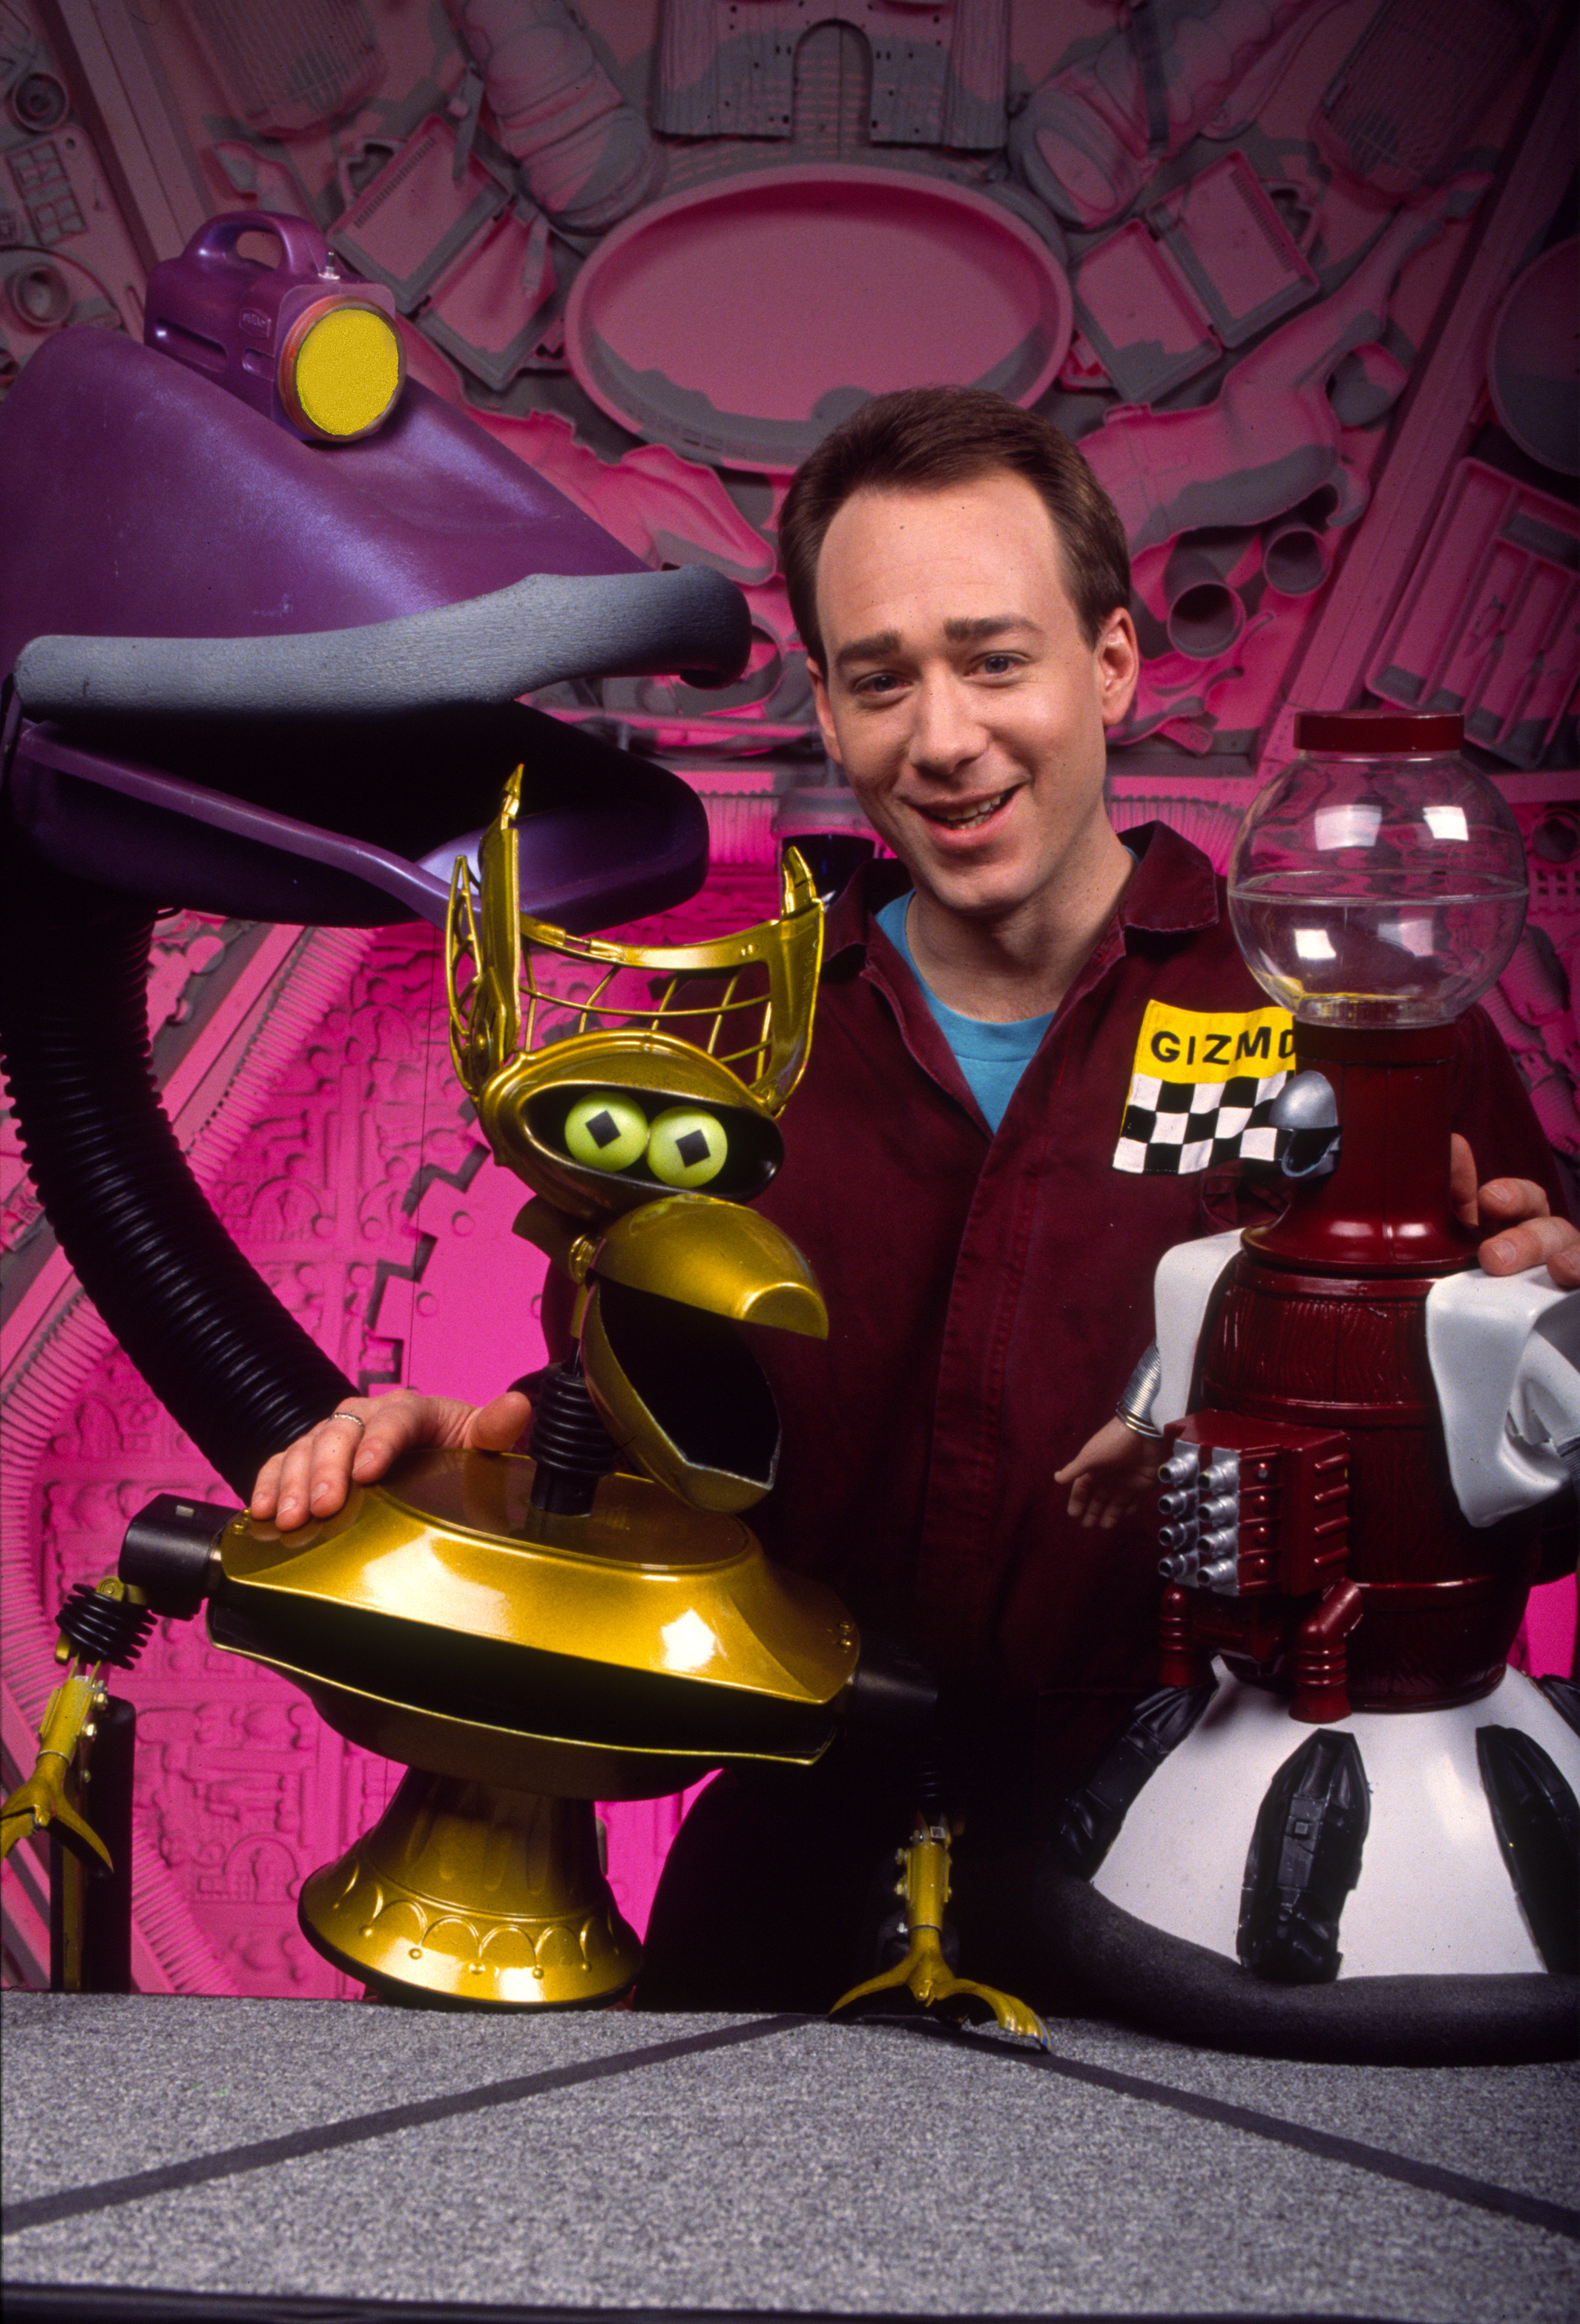 IT'S YOUR OPEN THREAD for episode 1302 Robot Wars, starting tonight at  8pm ET / 5pm PT, only in the Gizmoplex! - Season 13 - Mystery Science  Discourse 3000